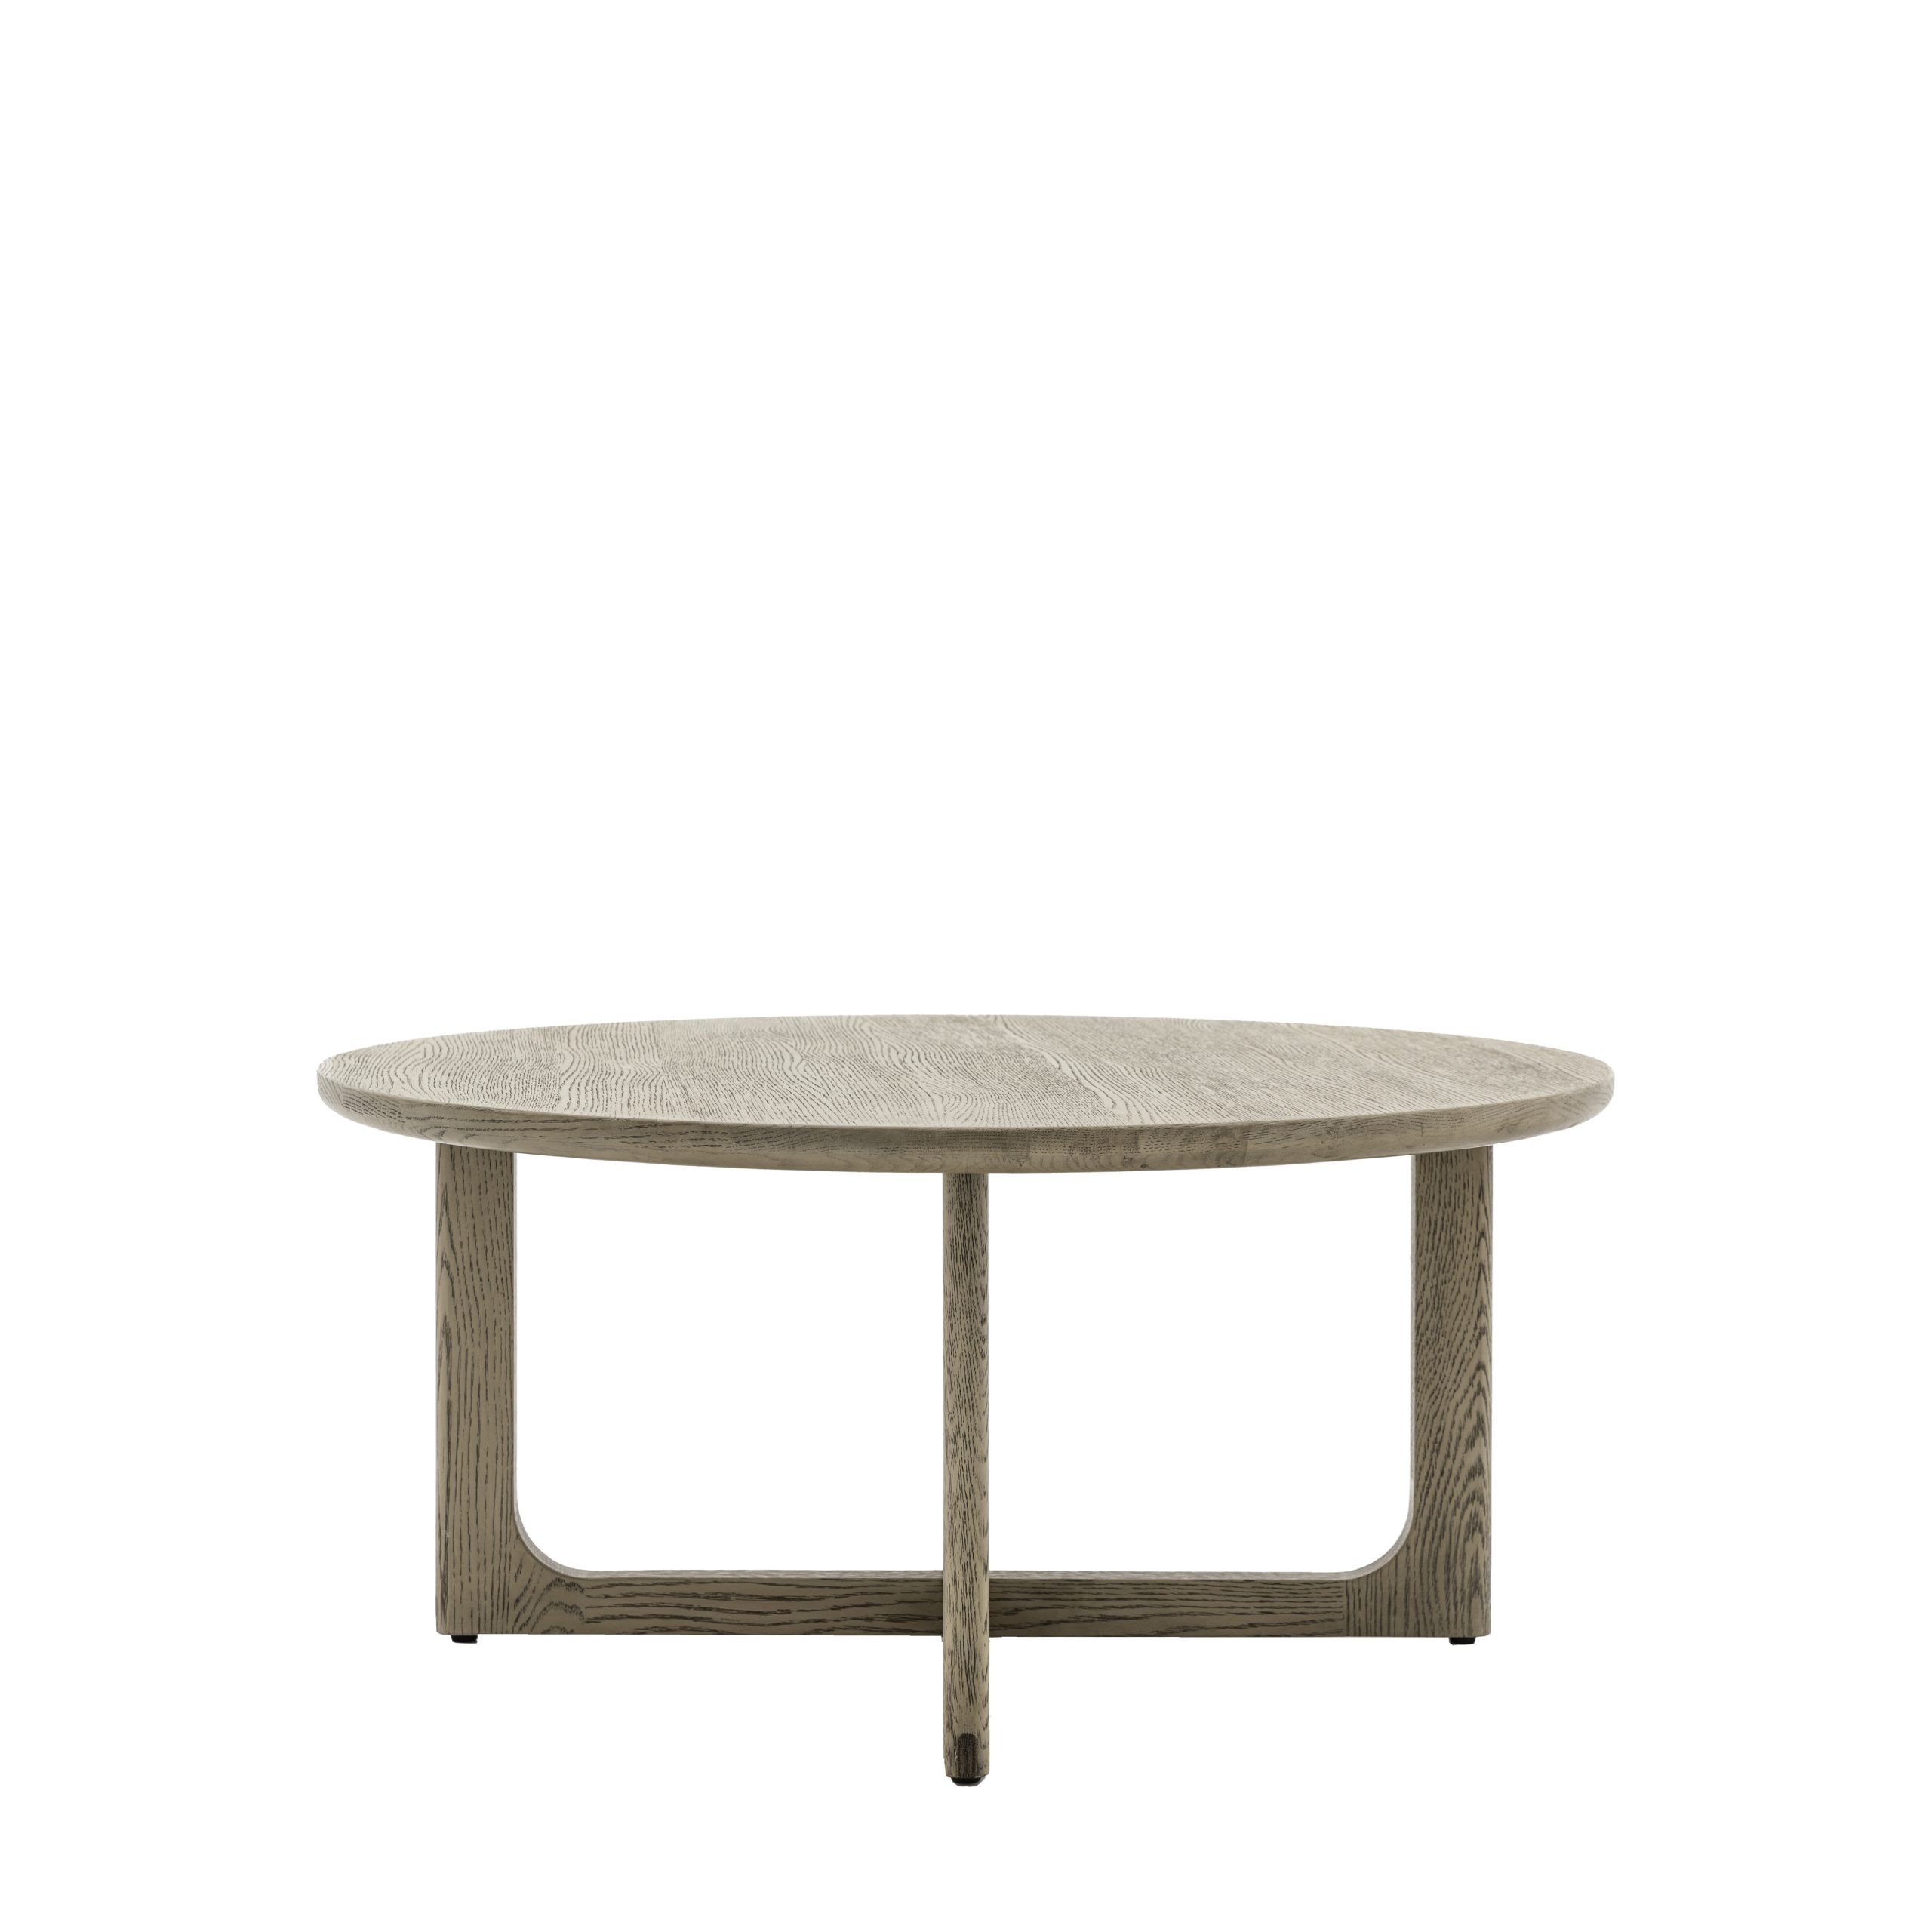 Gallery Direct Craft Round Coffee Table Smoked